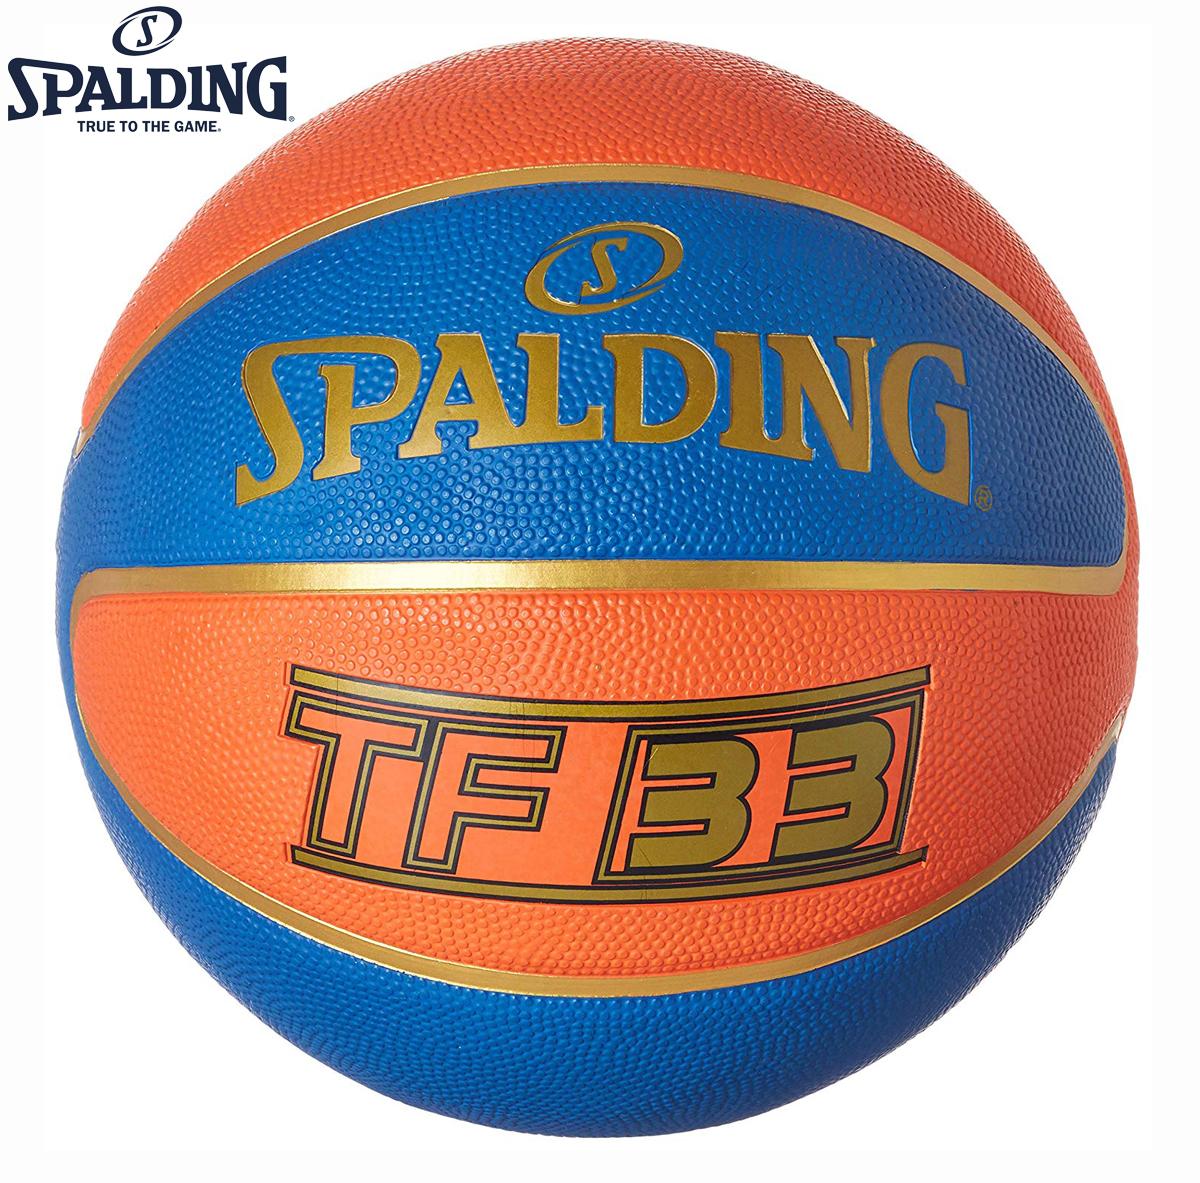 Details about   Spalding TF 33 Basketball Game Ball Size 6 28.5" 73-849Z 